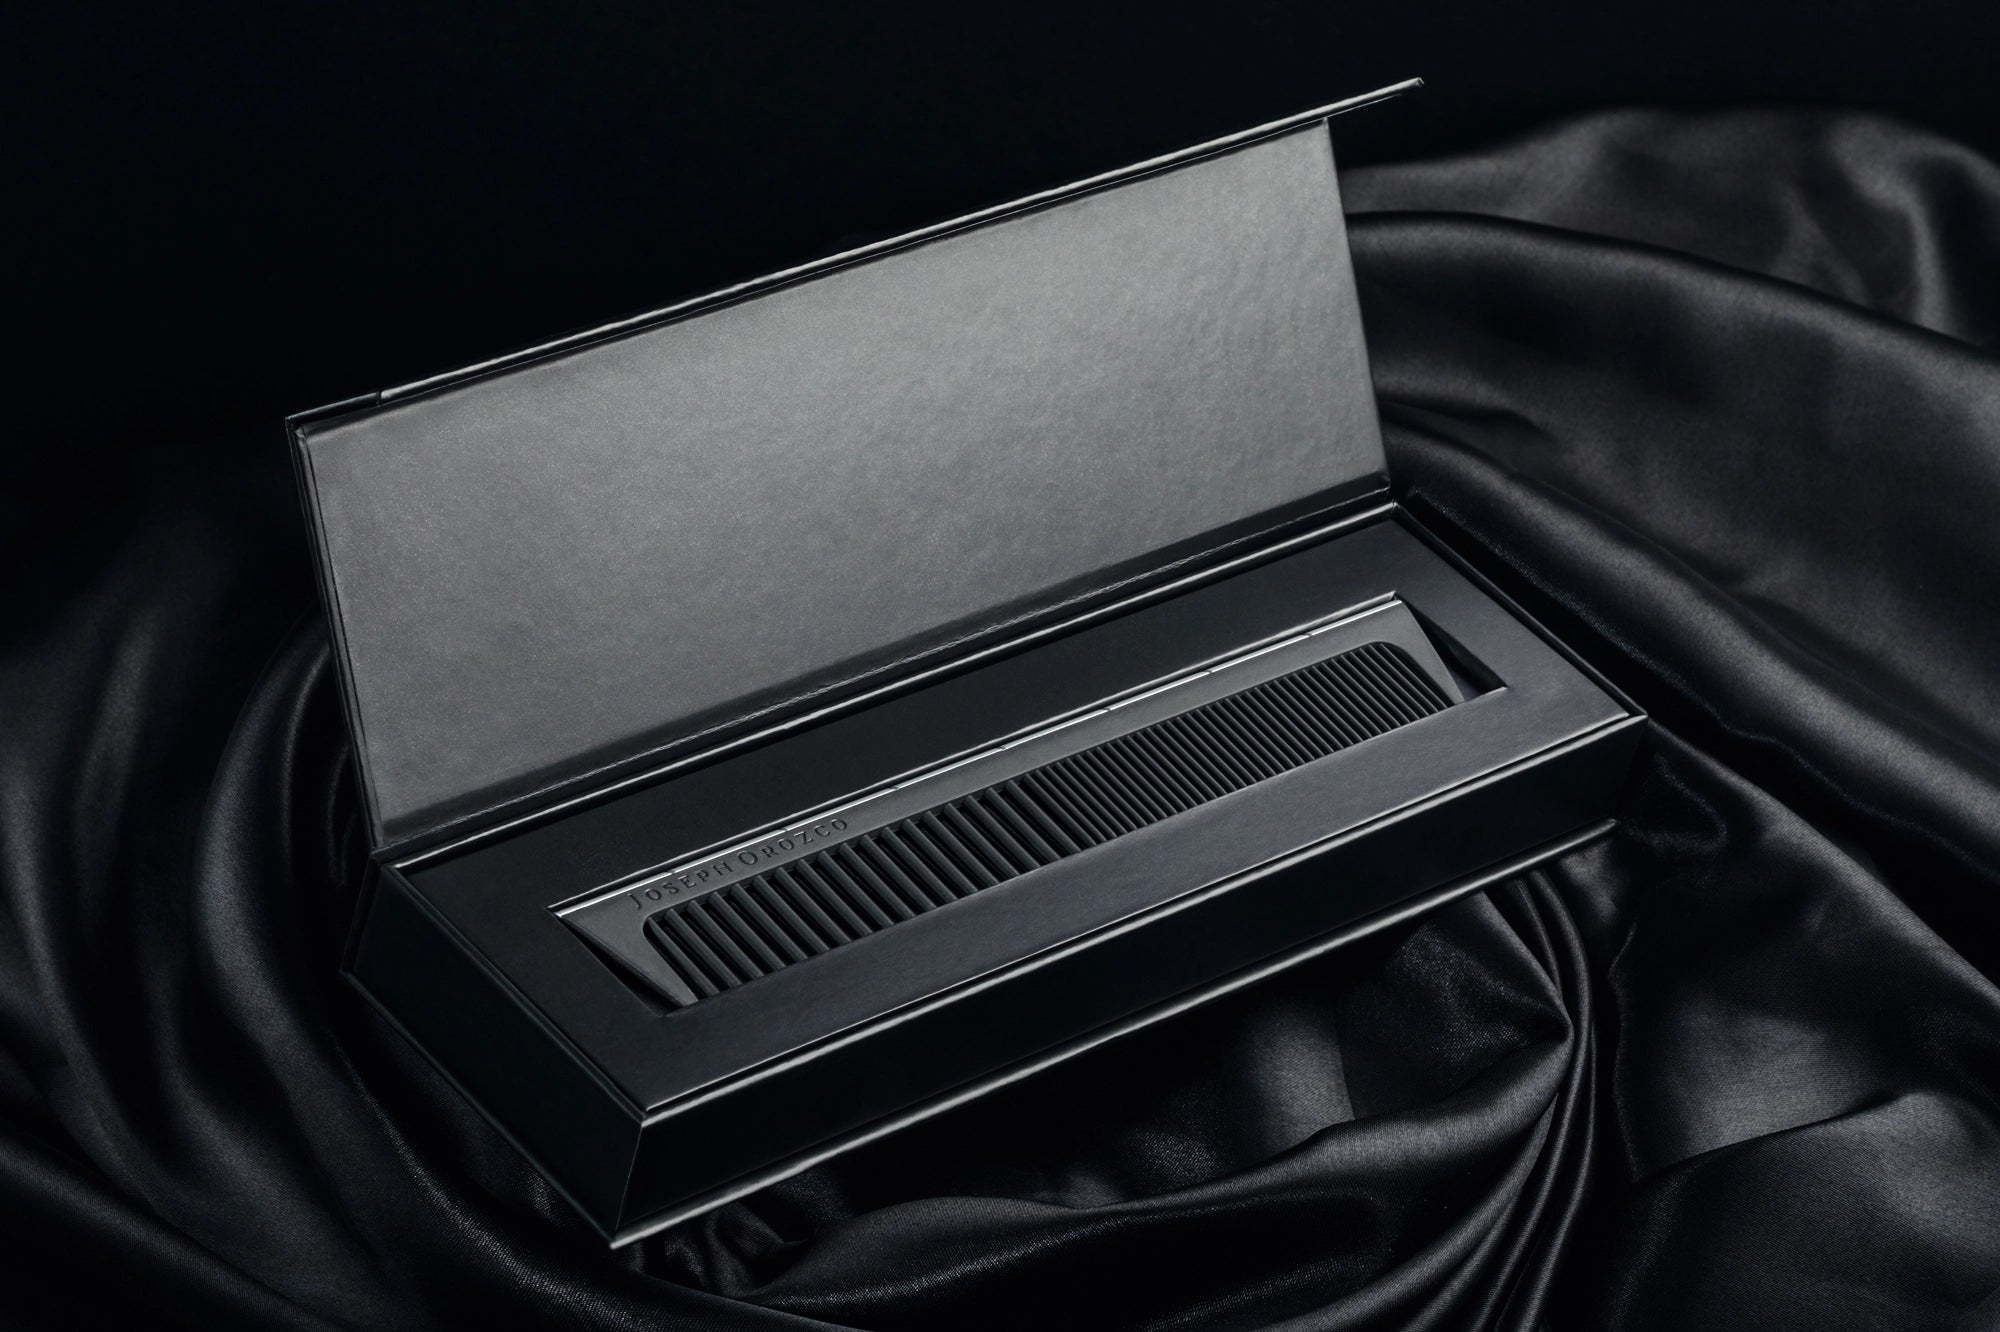 An elegant Joseph Orozco professional hair comb is presented within a sophisticated matte black box, placed on a luxuriously draped satin fabric, highlighting the premium quality of the hair styling tools by this pro hair brand.